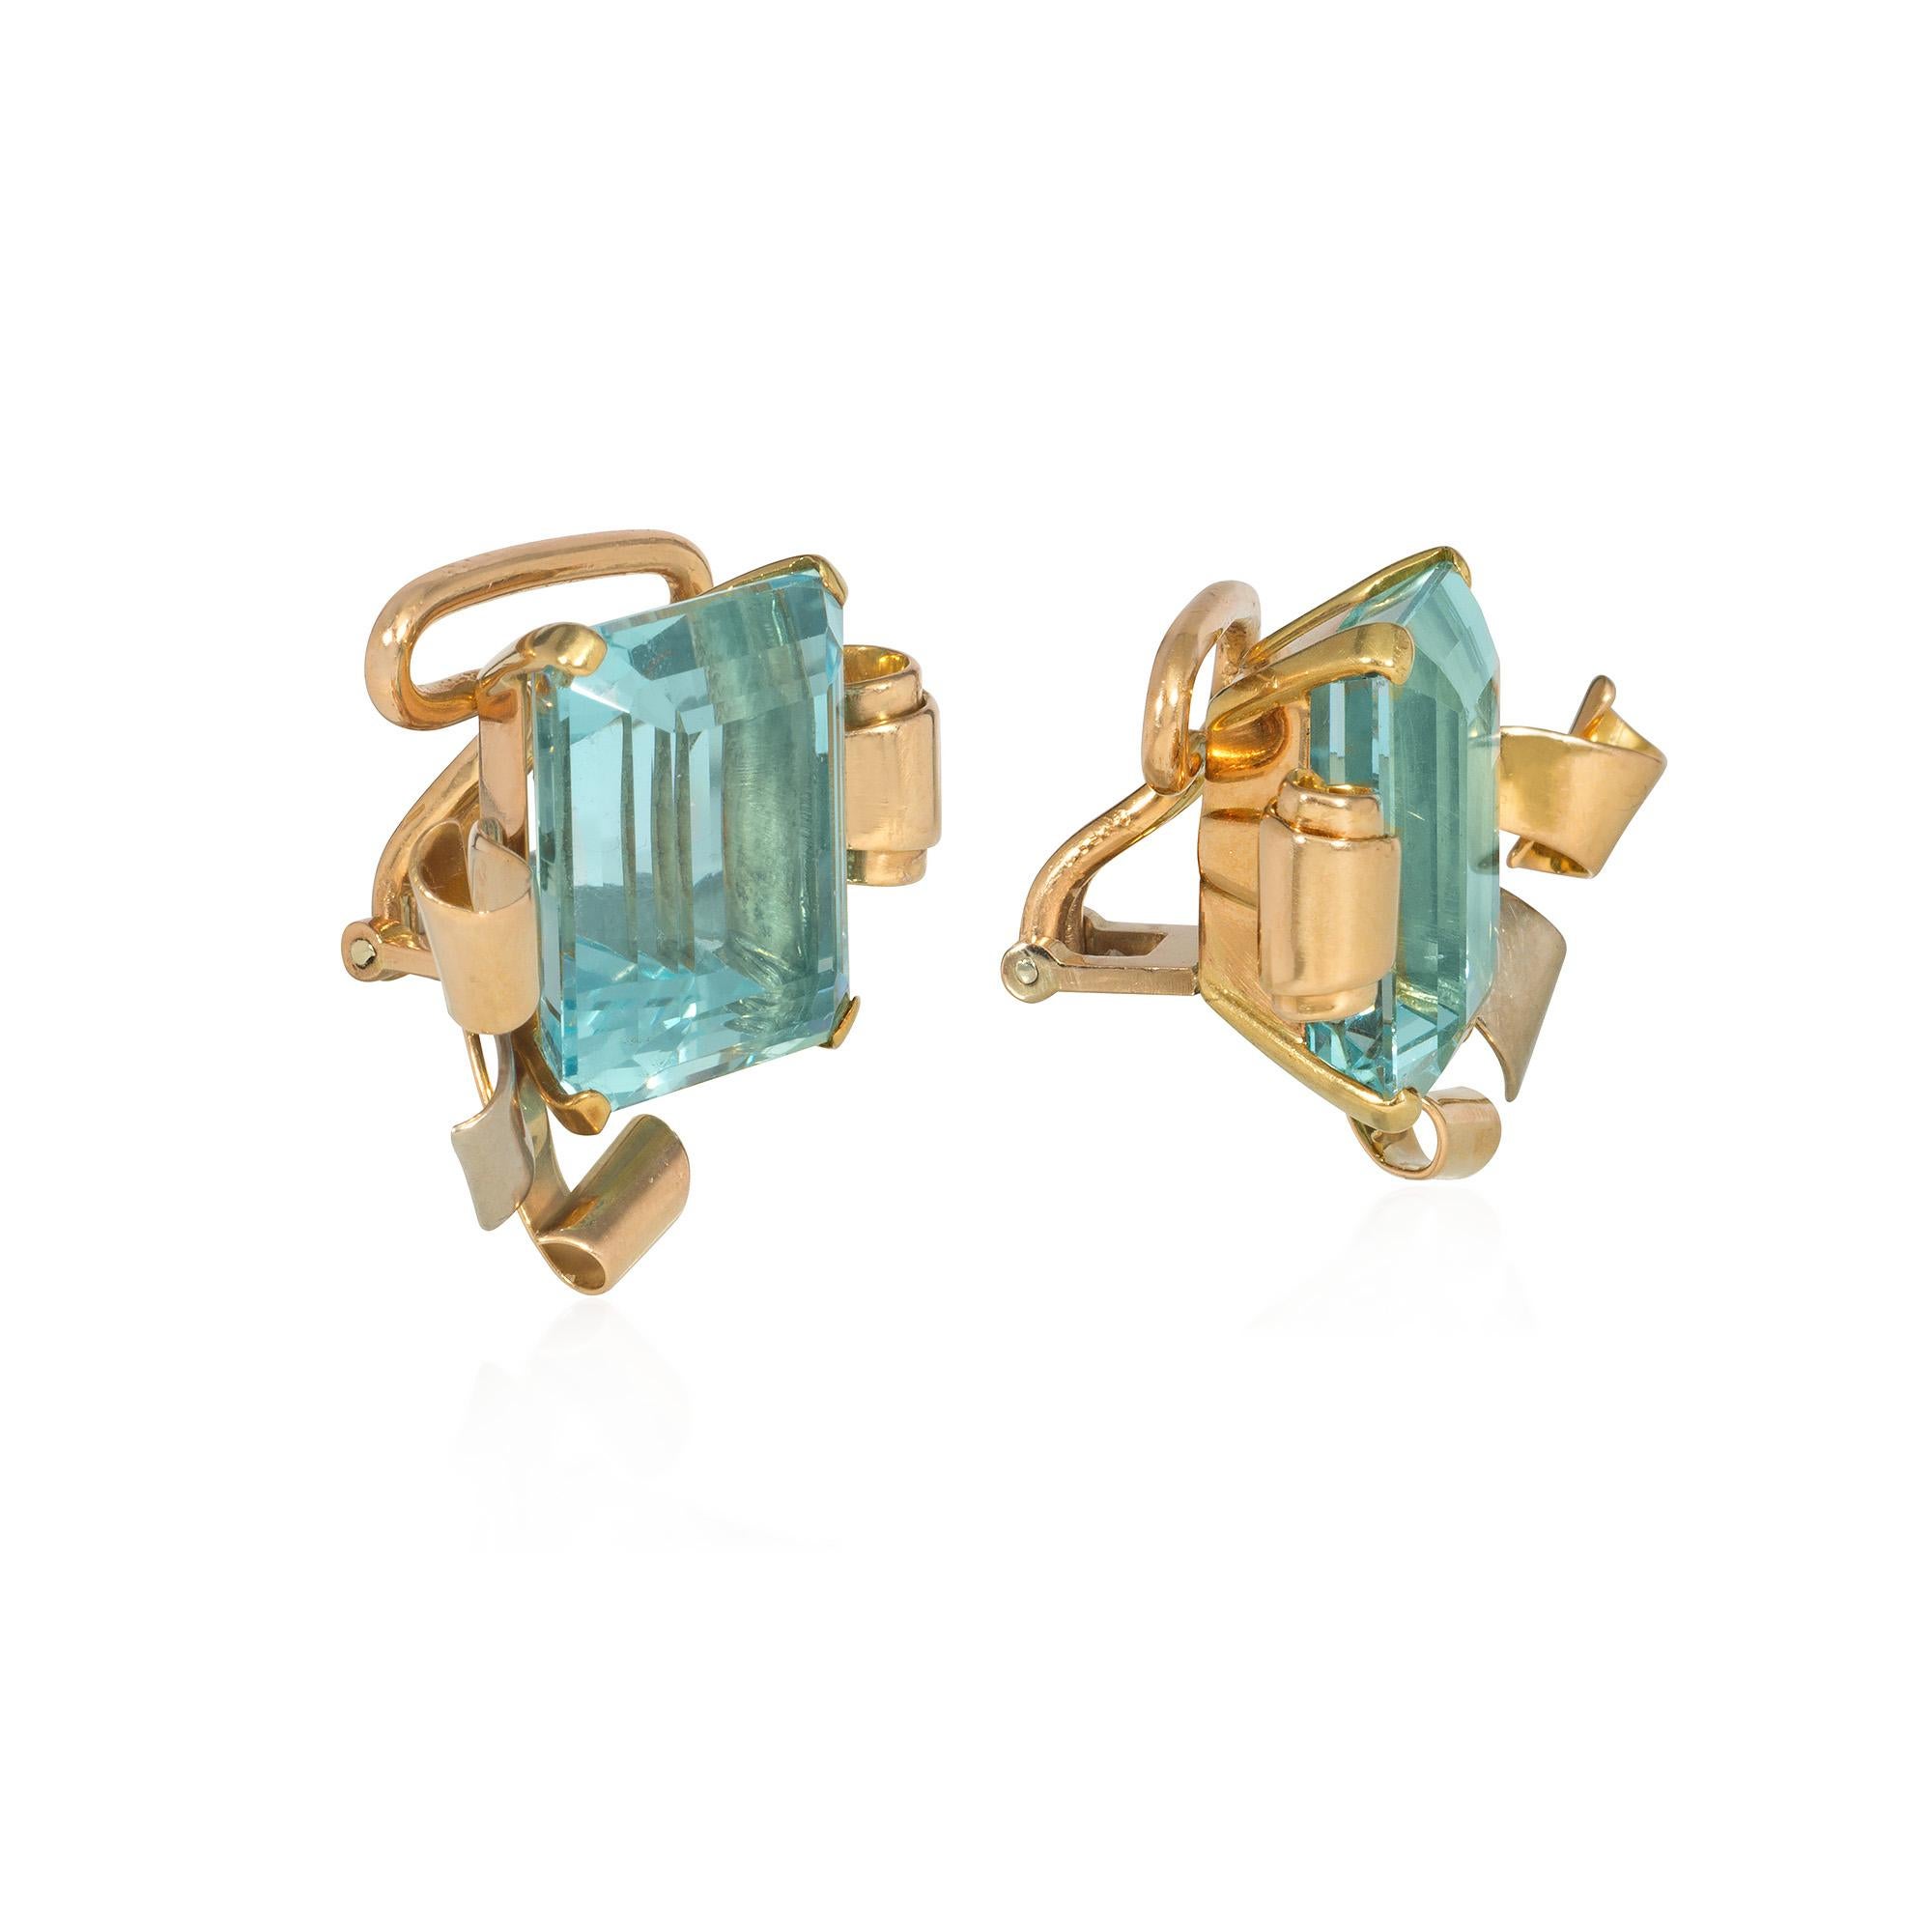 A pair of Retro aquamarine and three-color gold clip earrings featuring large emerald-cut aquamarines in gold mounts embellished with scrolled, ribbon-like yellow, white, and rose gold elements.  Atw two aquamarines 30.00 cts.

* Includes letter of